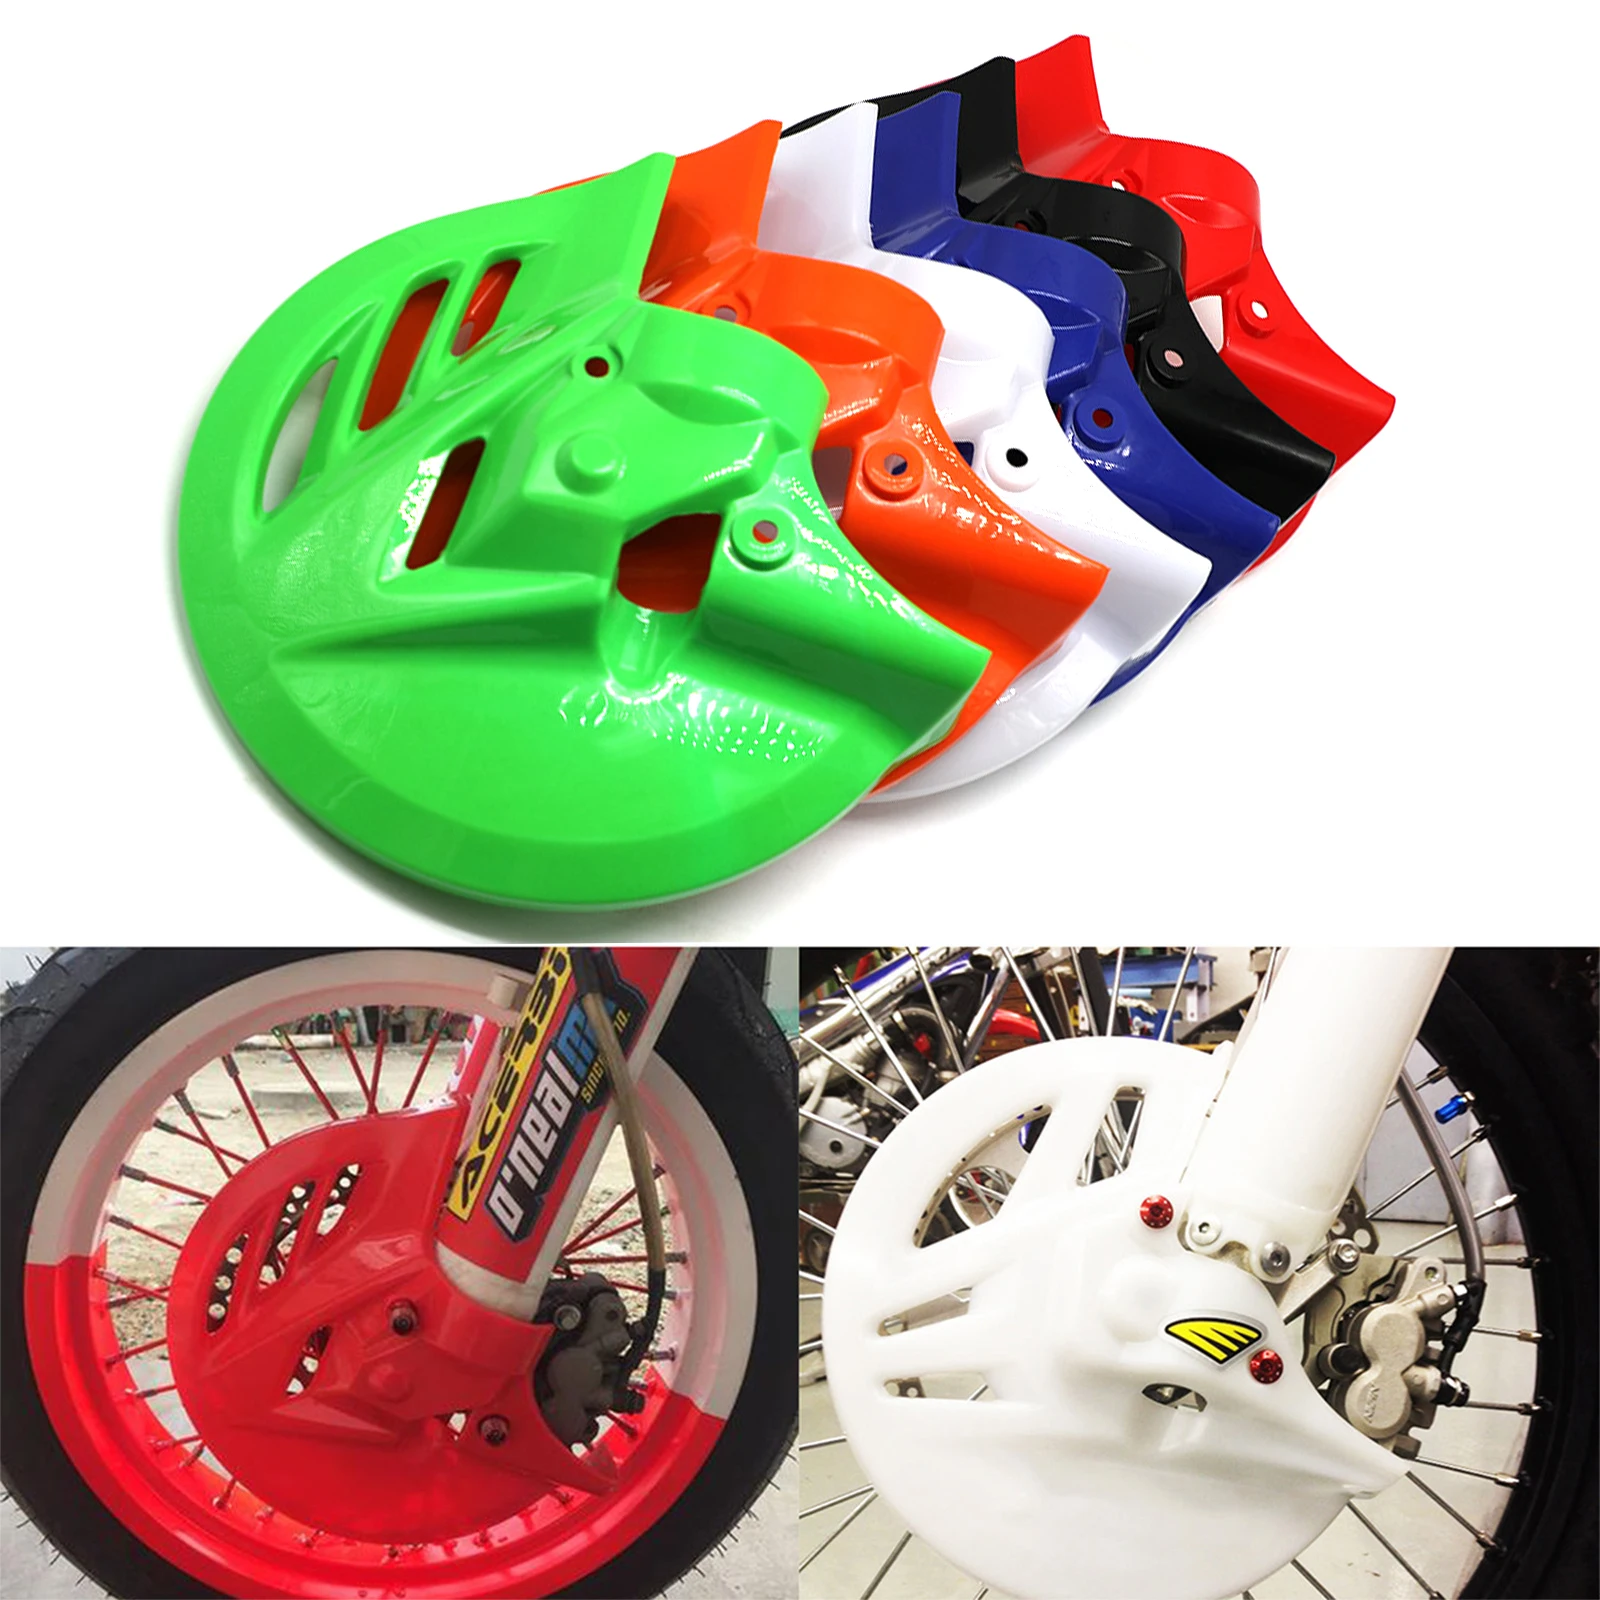 

Motorcycle Dirt Bike Plastic Protection Cover Brake Disc Protective Rear Brake Disc Cover For Honda CRF250X CRF450X CRF250R 450R